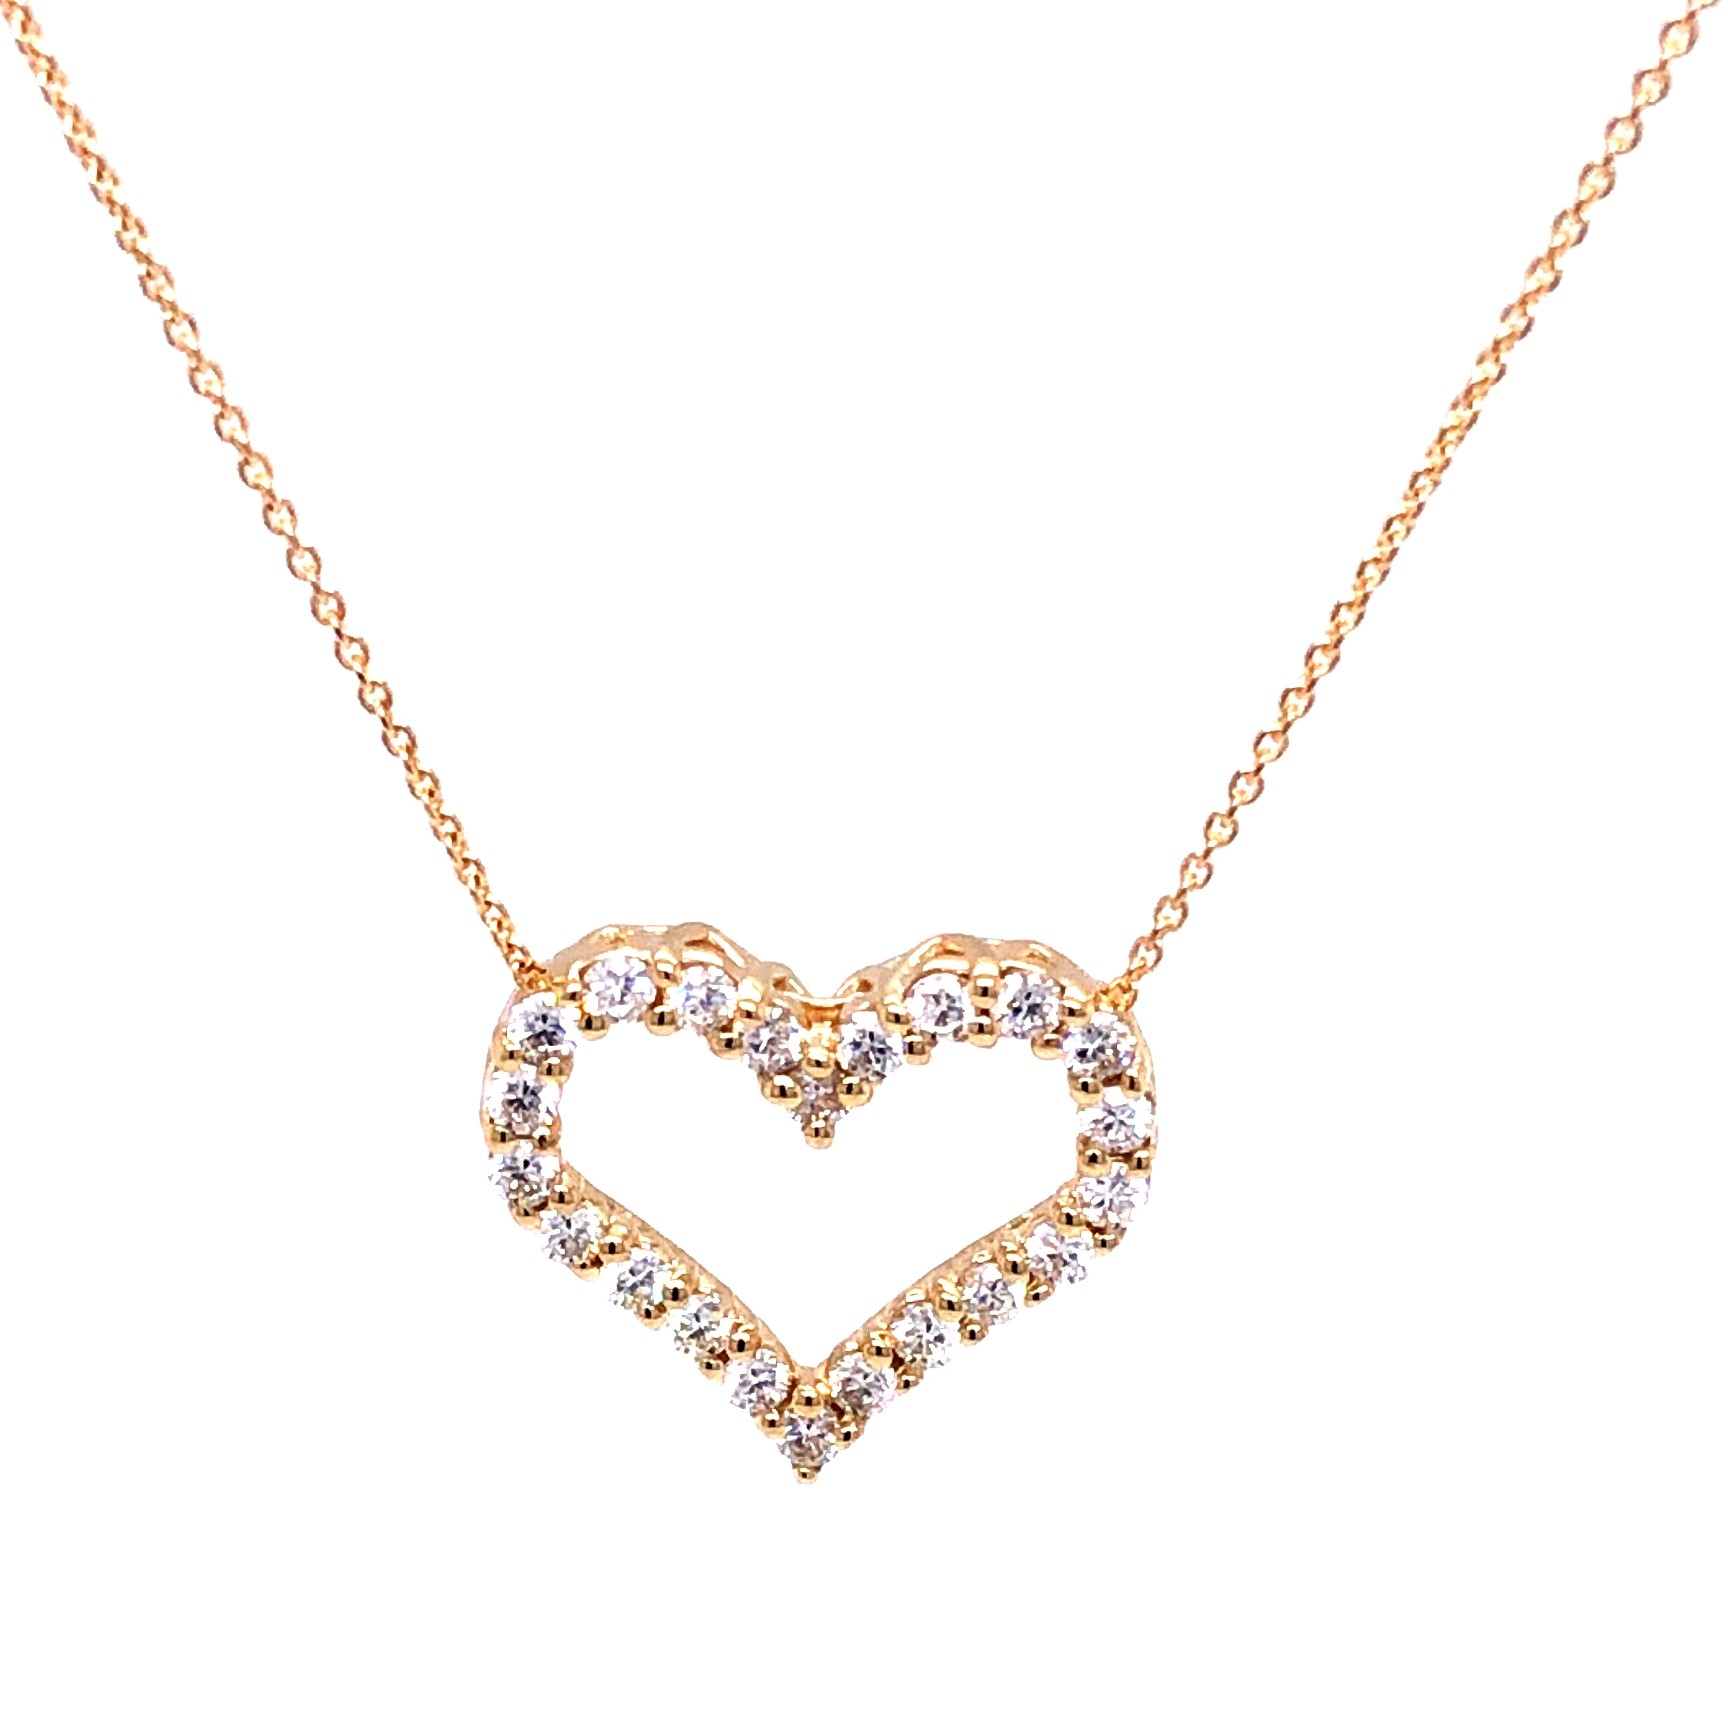 Lady s 14 karat yellow gold heart pendant with 22 round brilliant cut diamonds H color  VS in clarity on a 14 karat yellow gold cable chain with lobster clasp 18 inches in length.